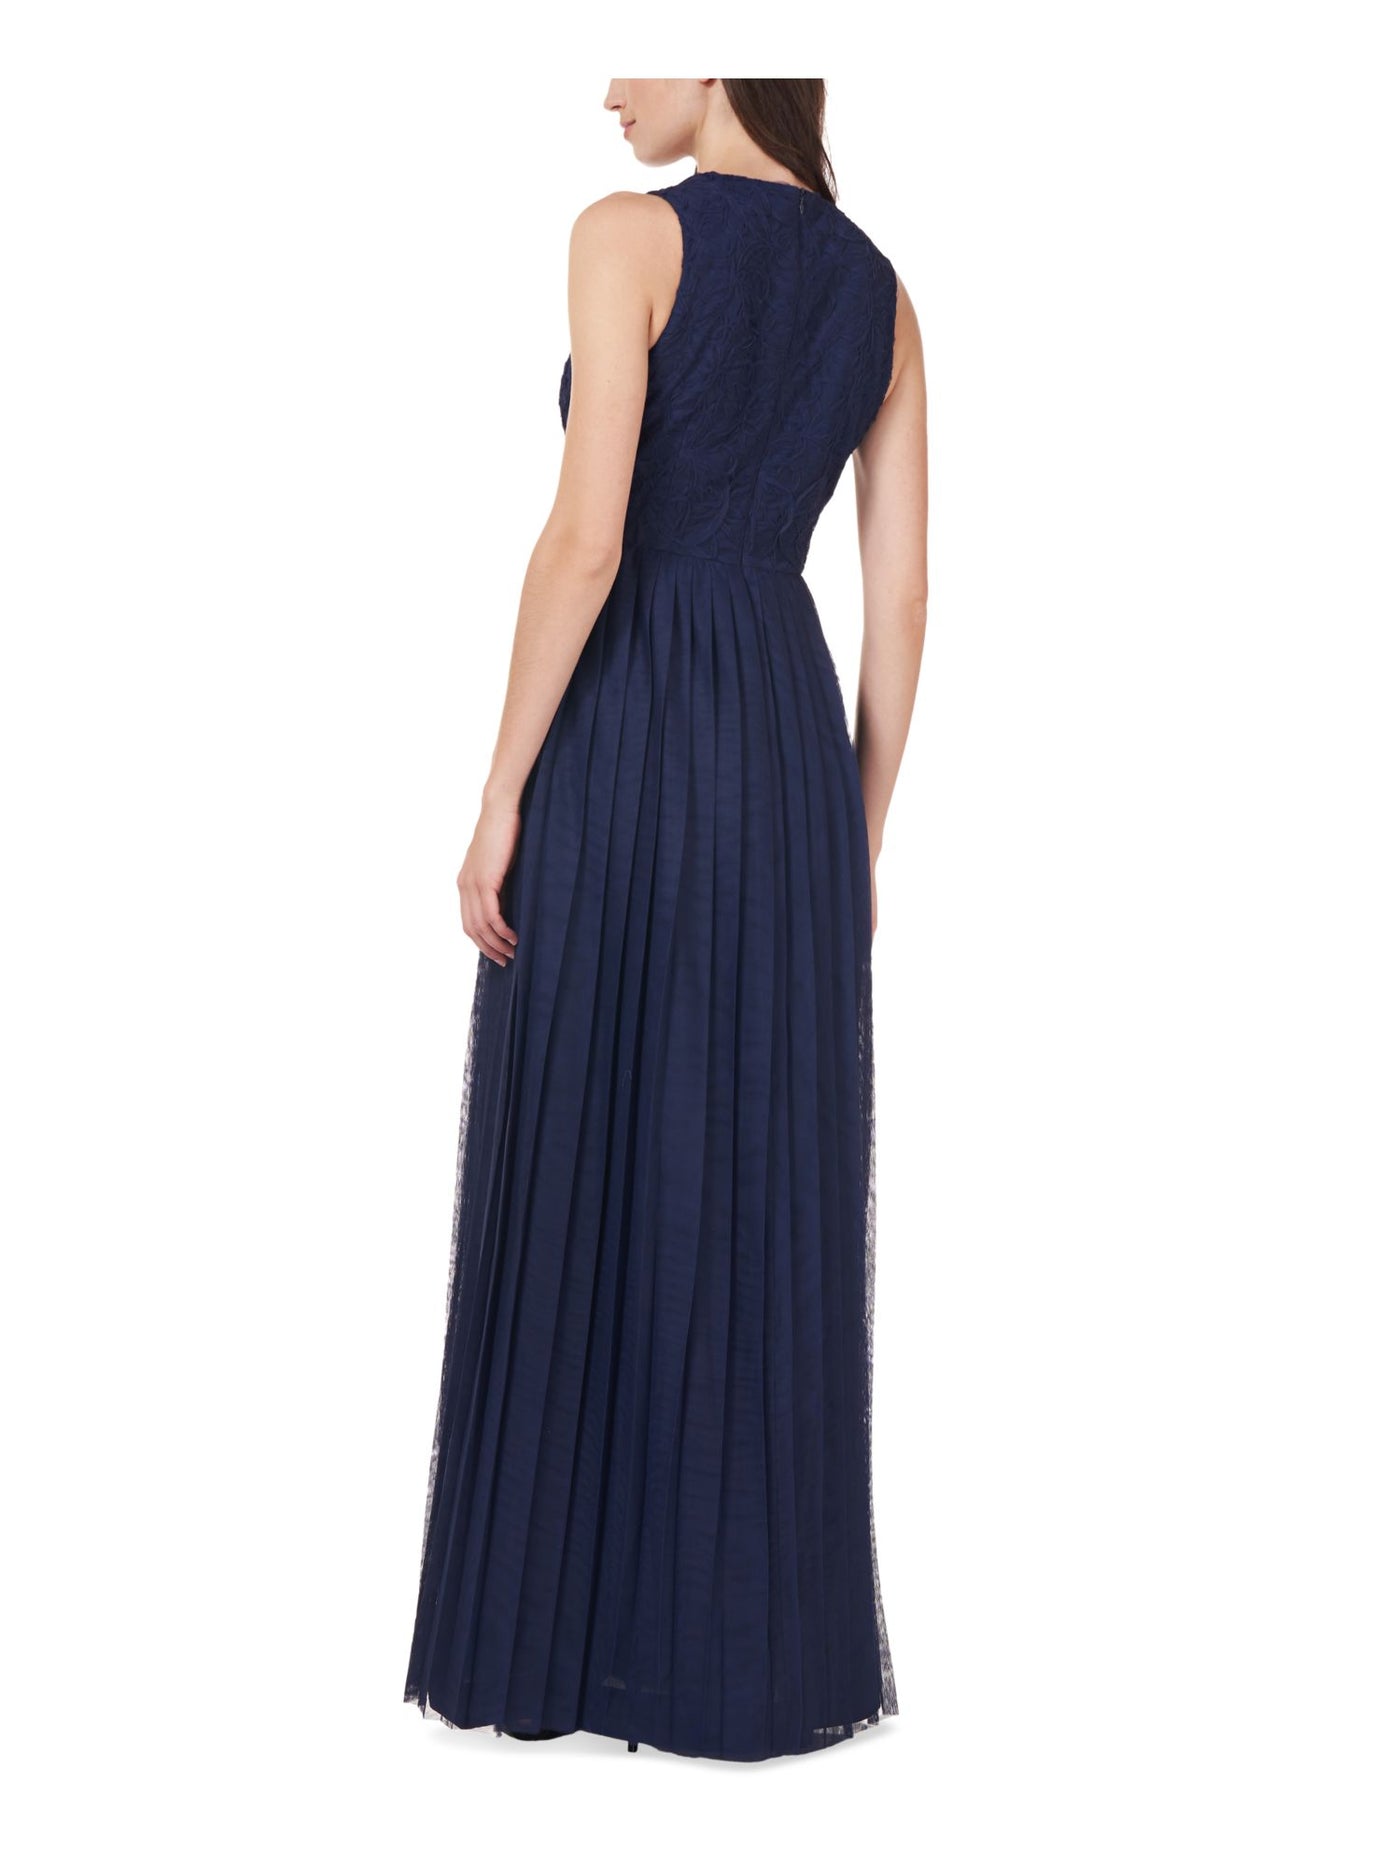 JS COLLECTION Womens Navy Zippered Pleated Sheer Lined Embellished Sleeveless V Neck Full-Length Formal Gown Dress 2